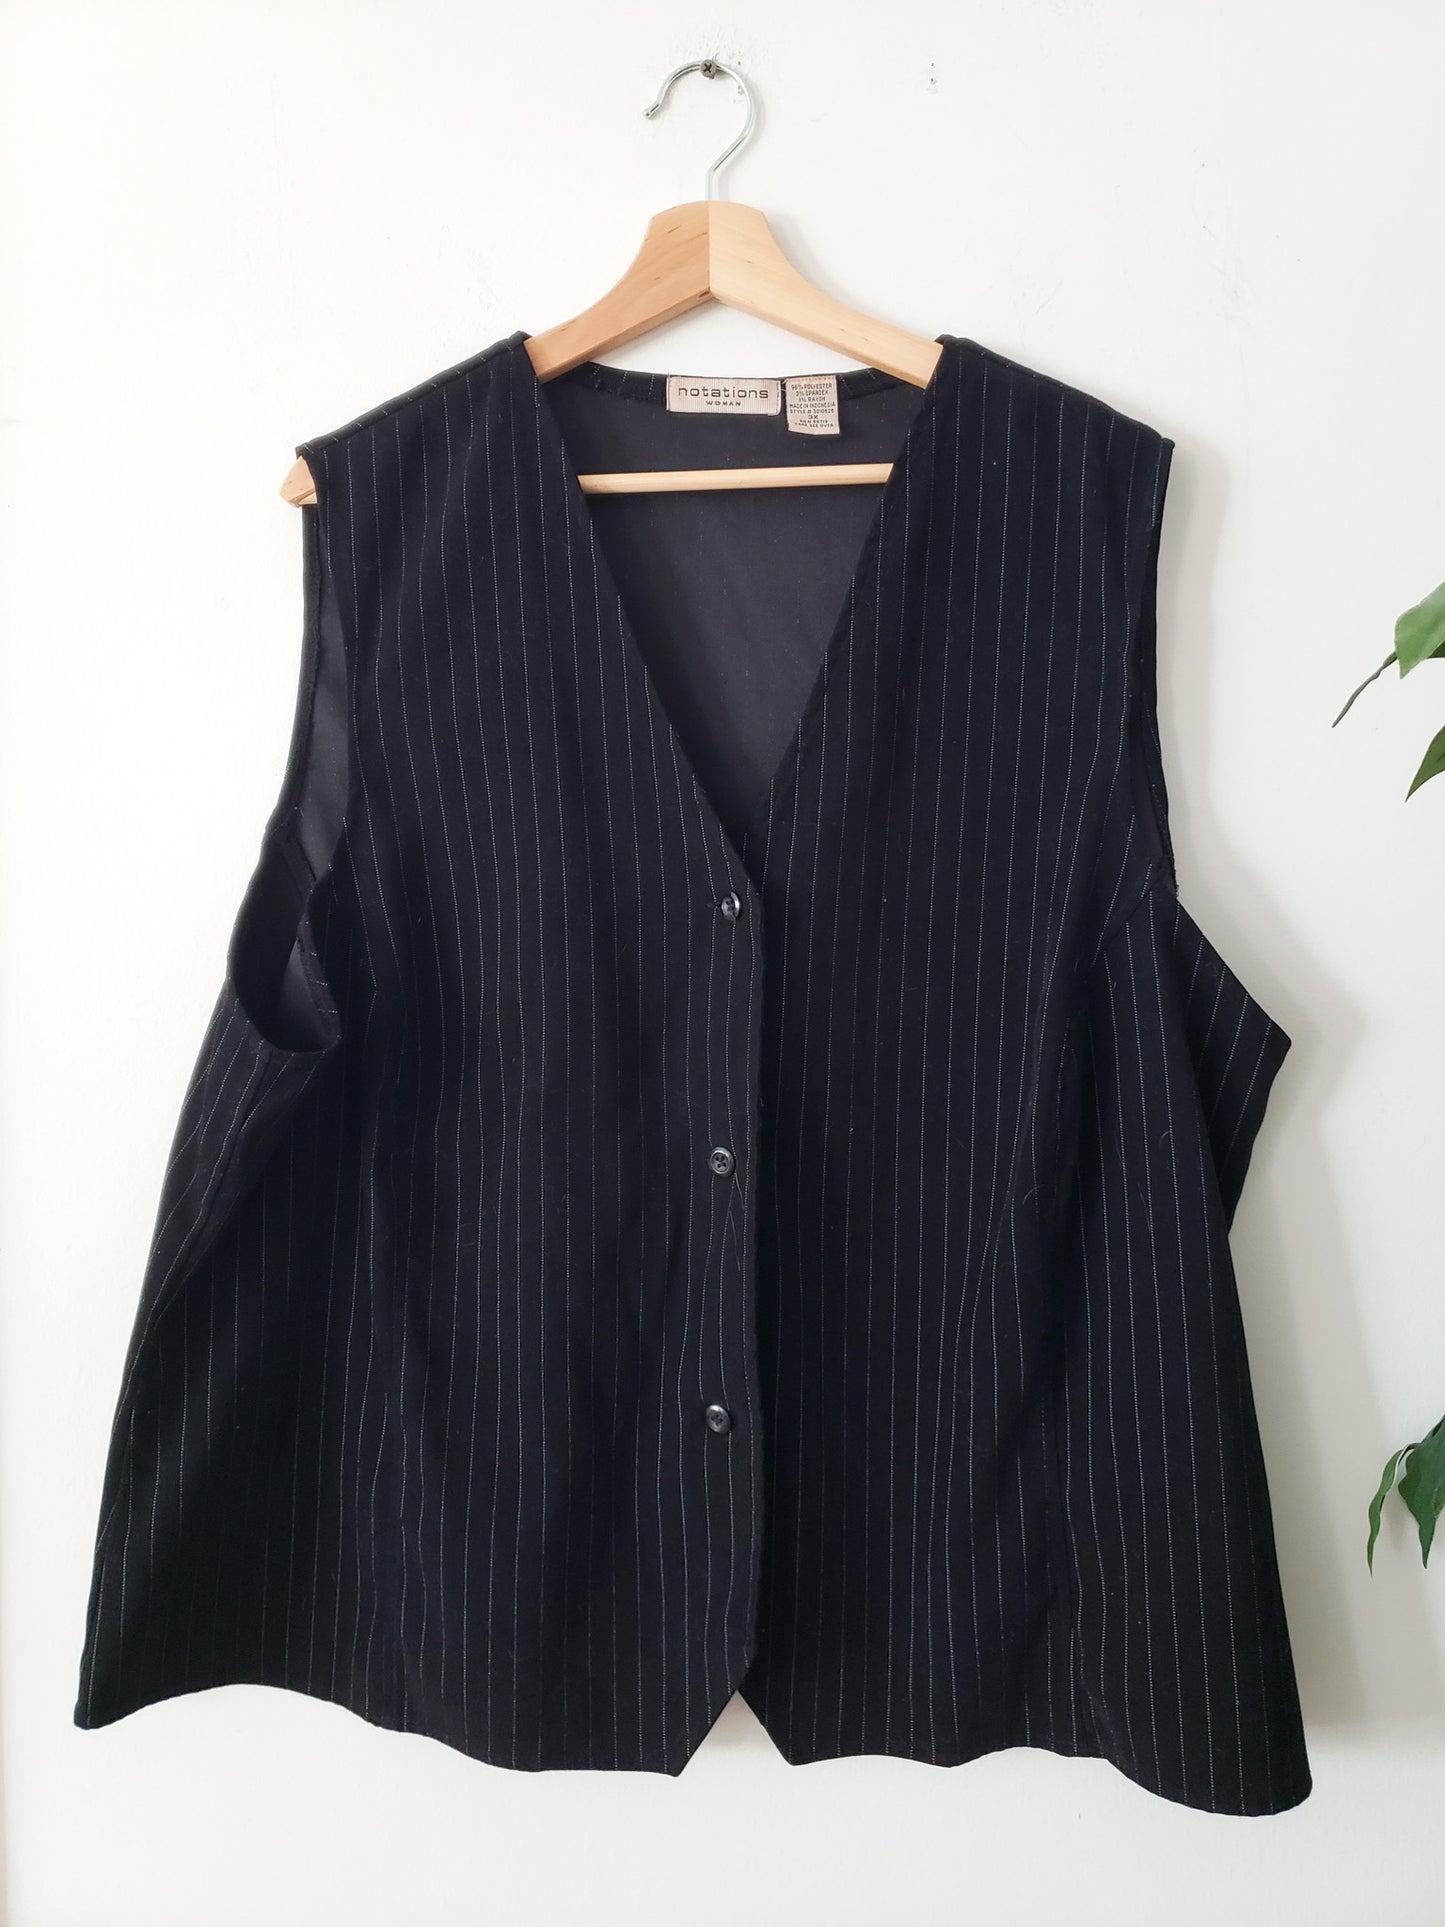 NOTATIONS BLACK AND WHITE PINSTRIPE VEST SIZE 3X